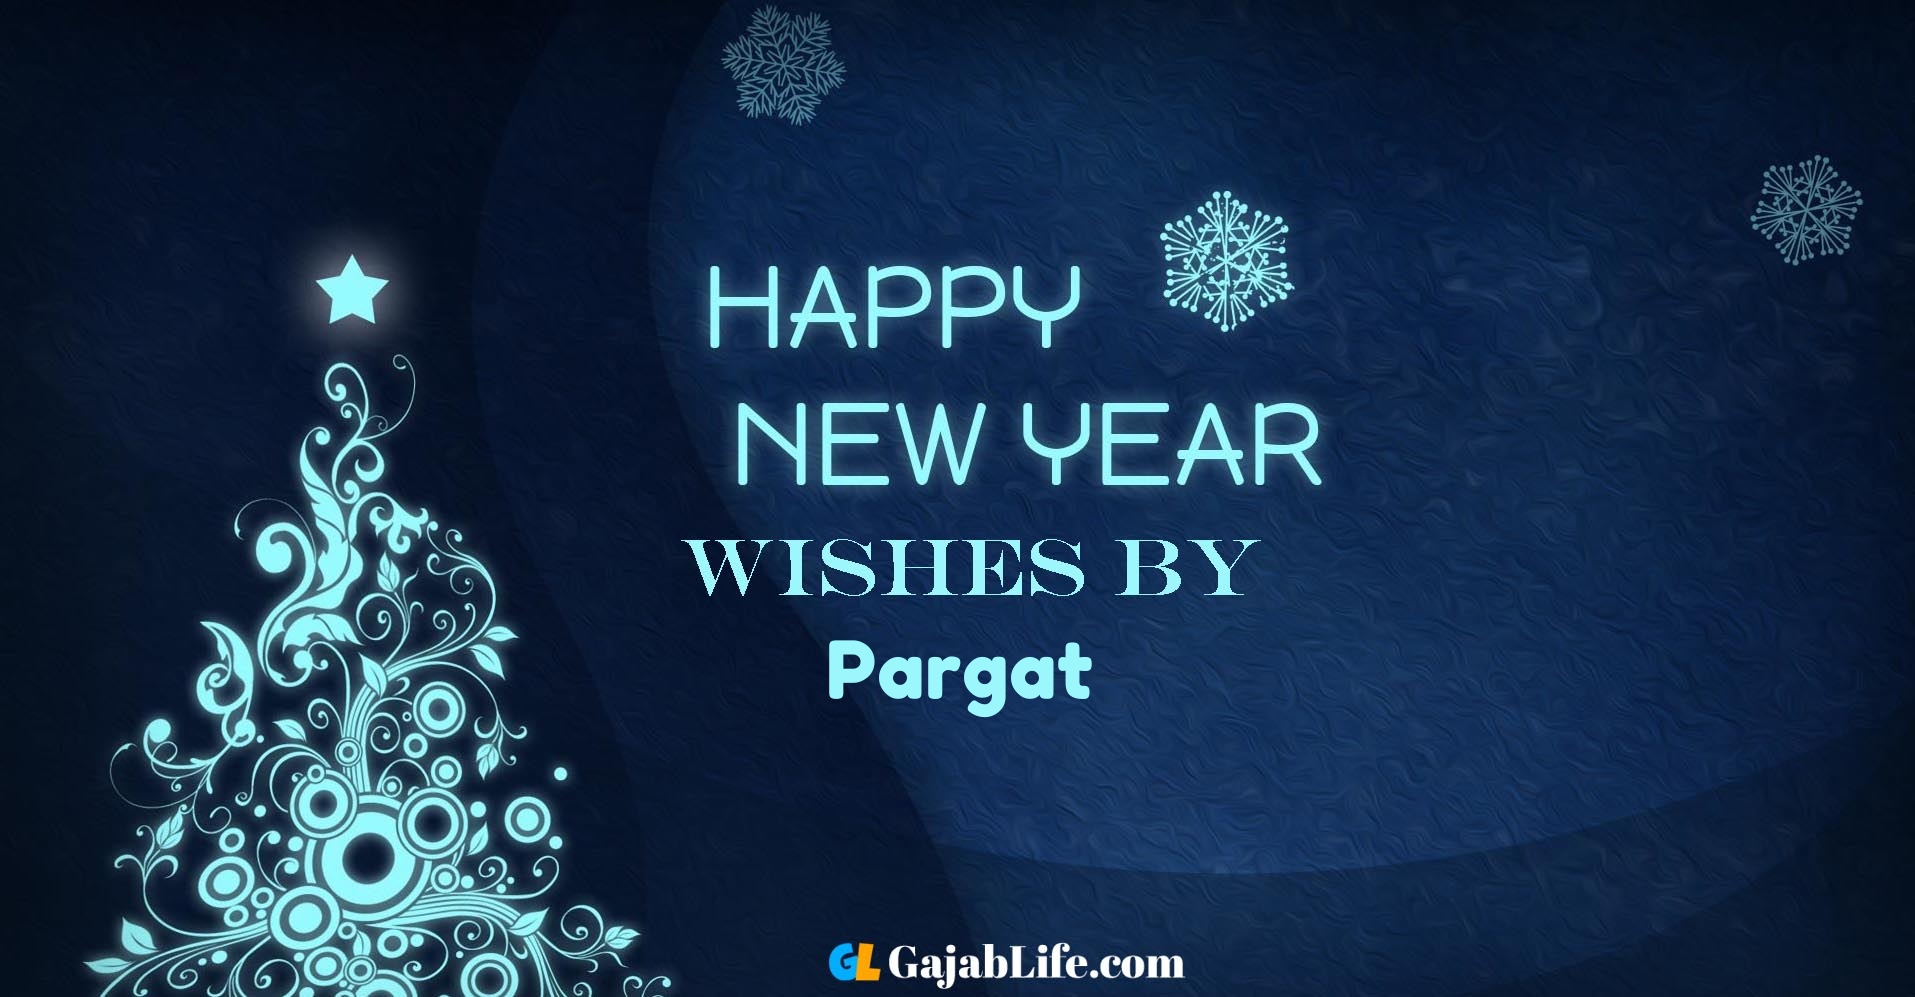 Happy new year wishes pargat